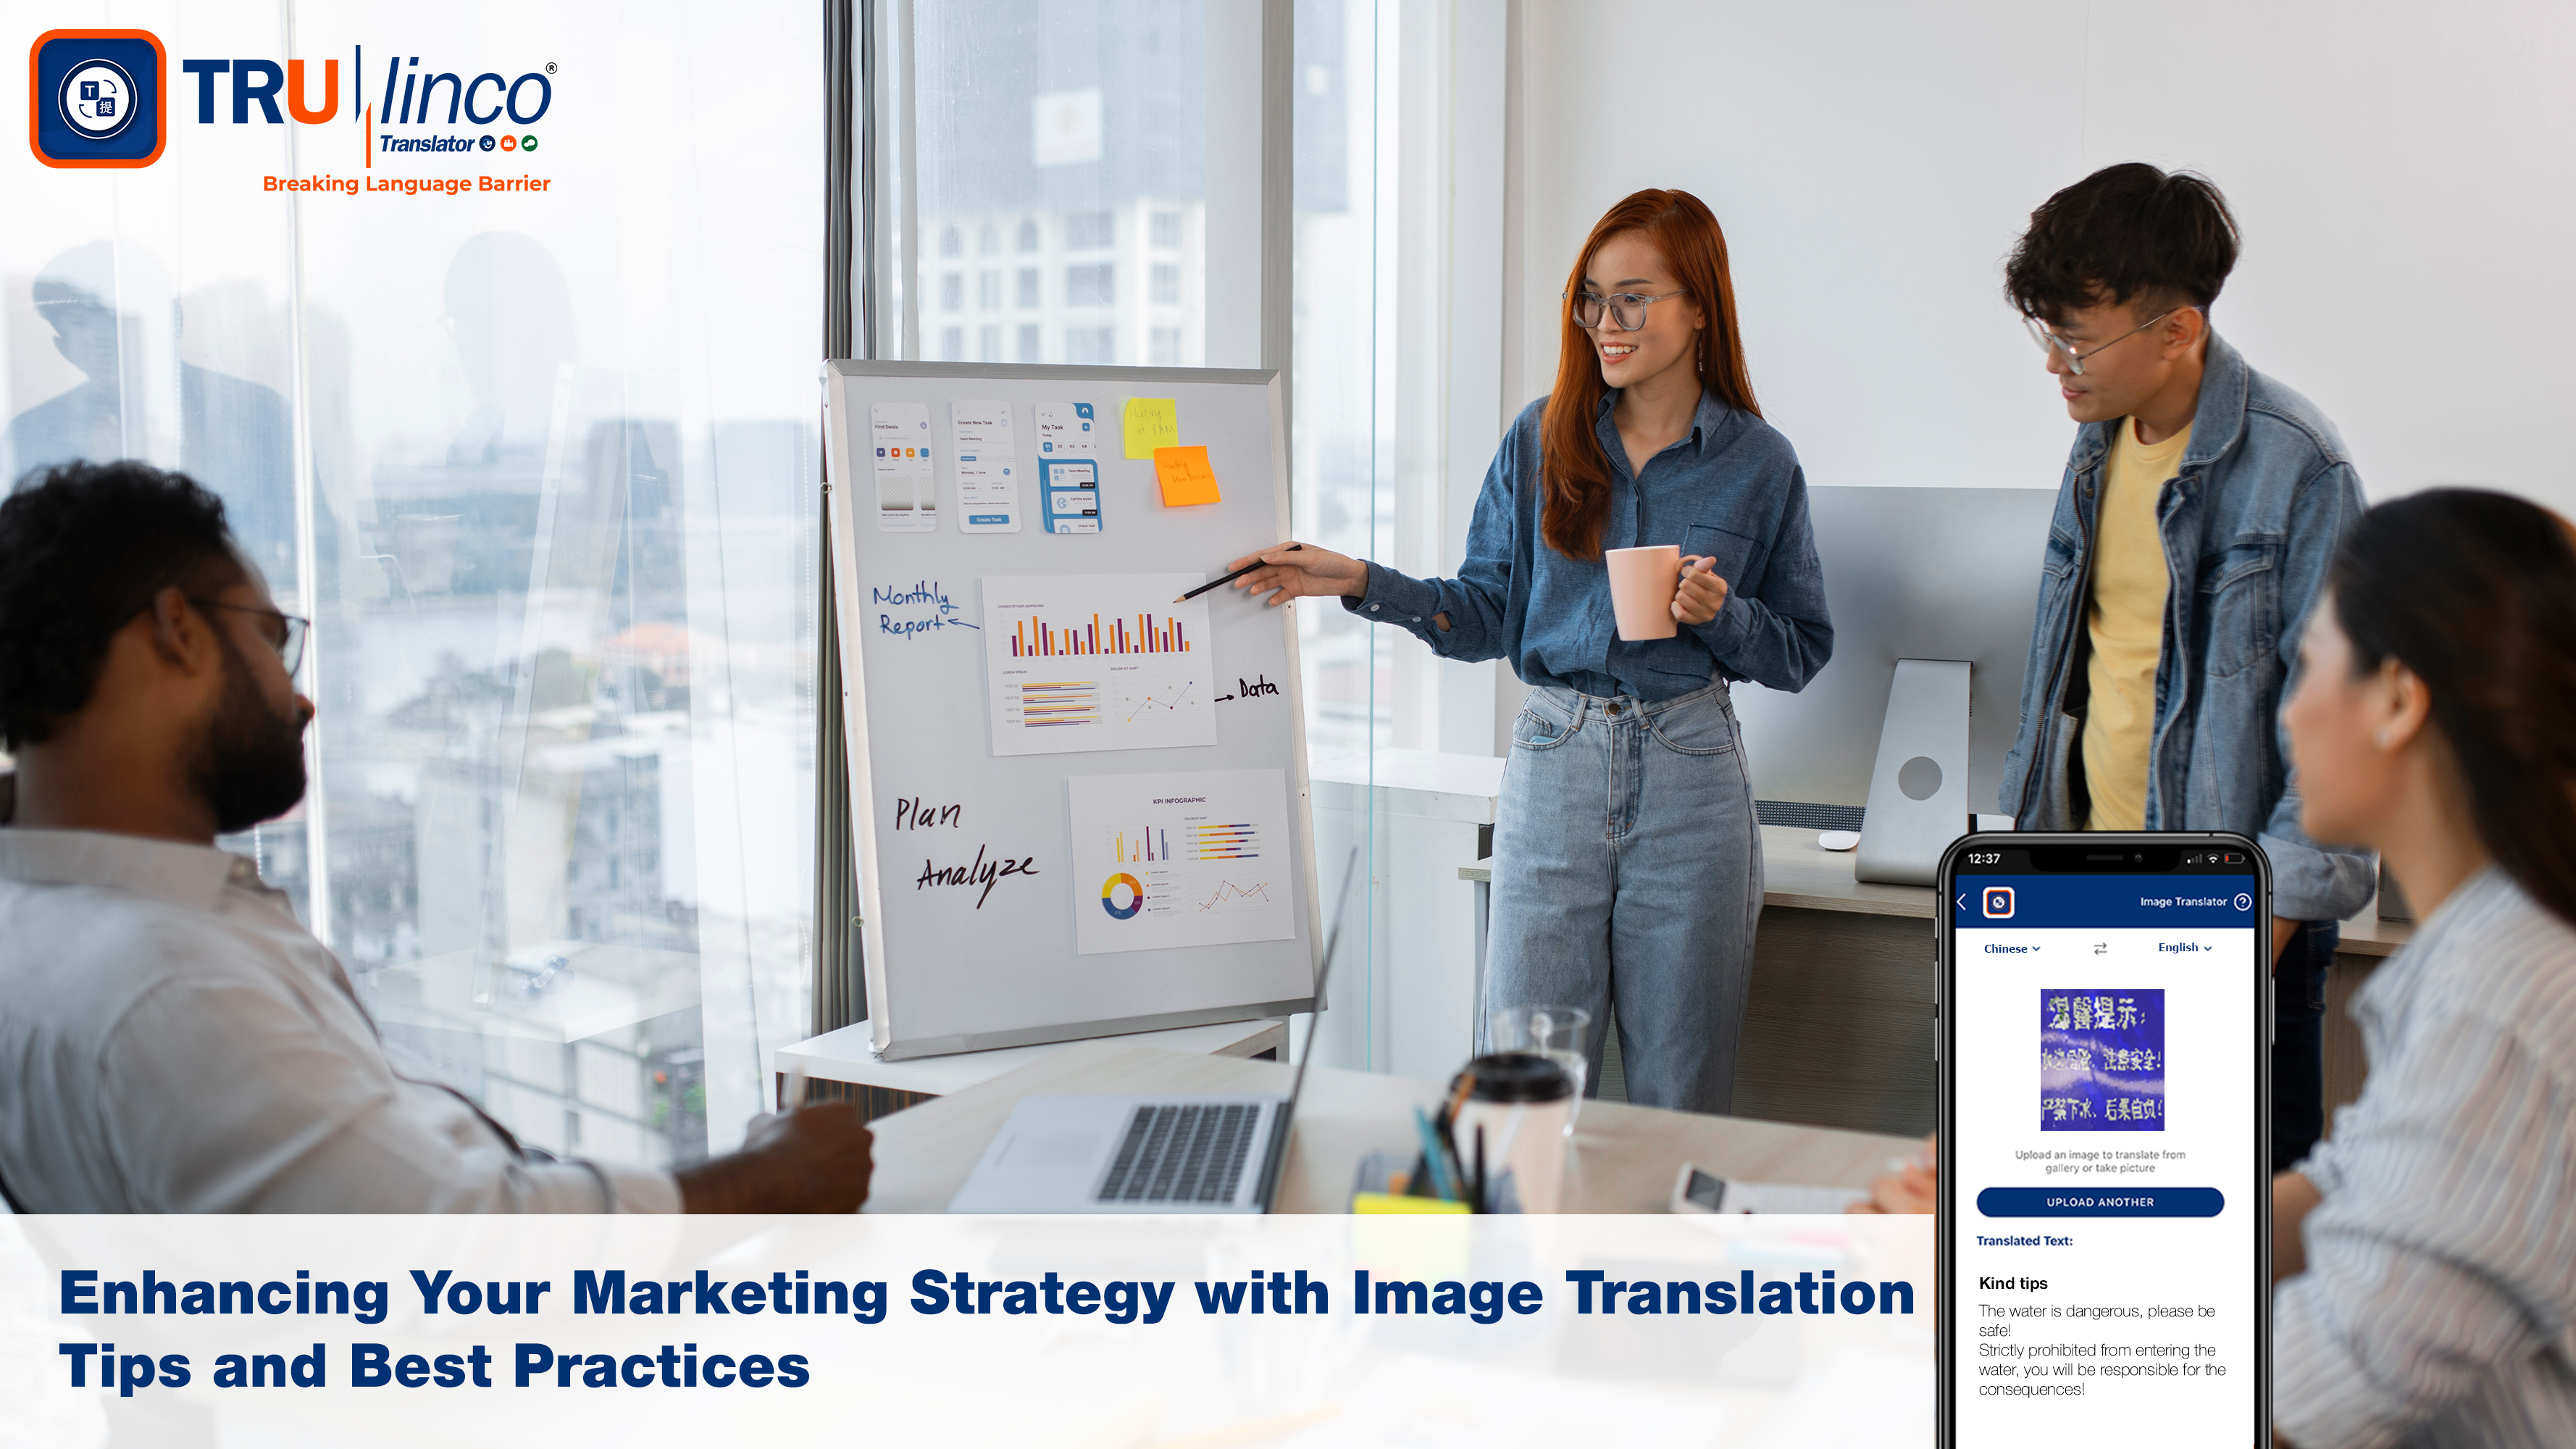 Enhancing Your Marketing Strategy with Image Translation Tips and Best Practices